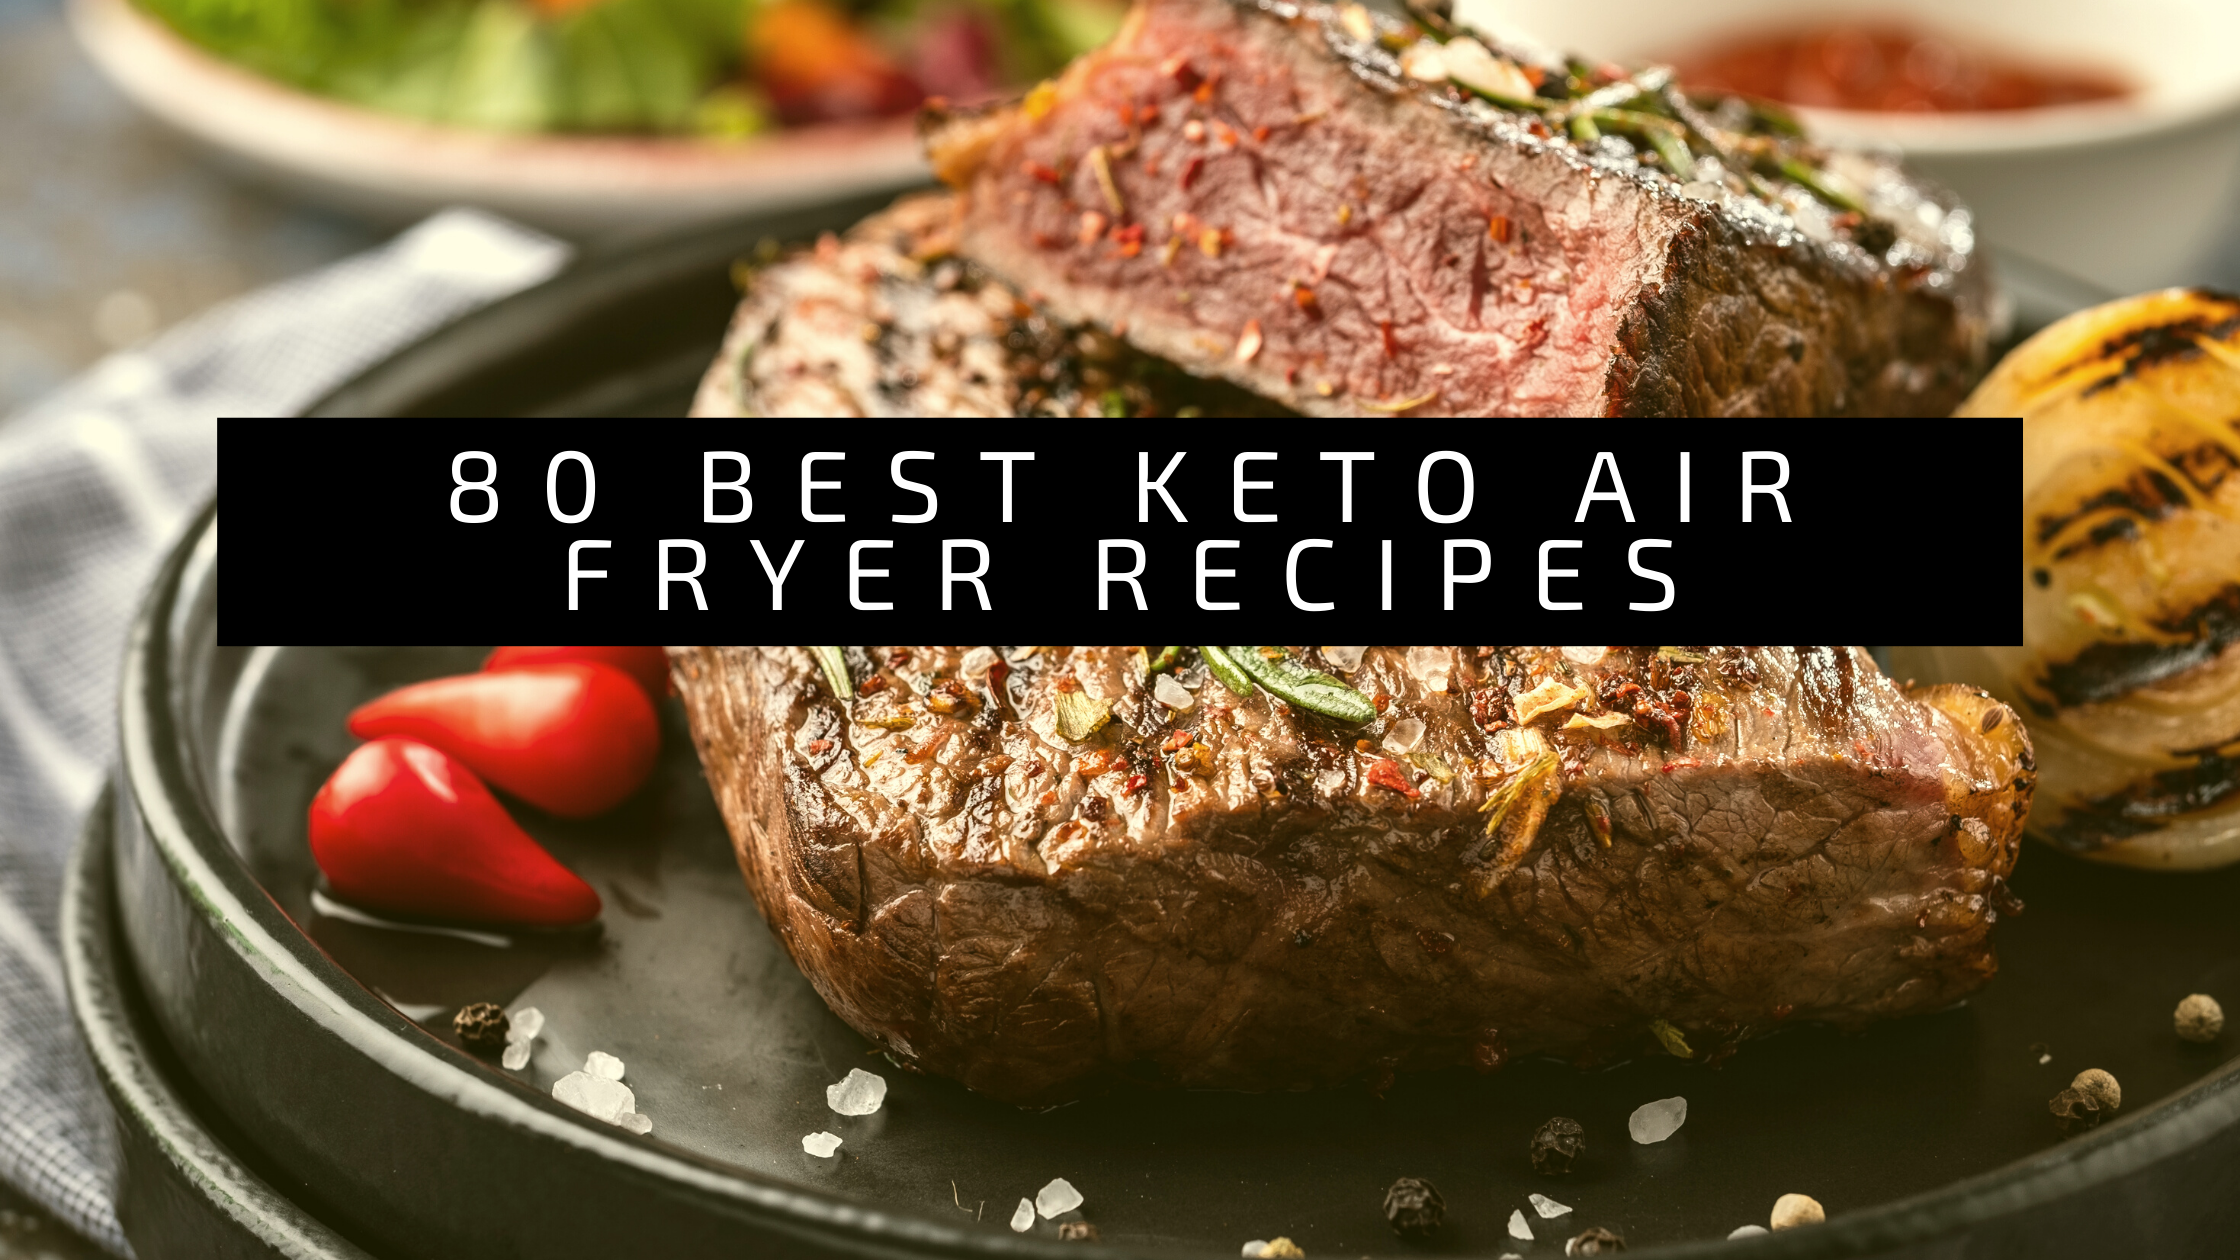 40 Family-Friendly Keto Air Fryer Recipes for Quick and Delicious Meals 2